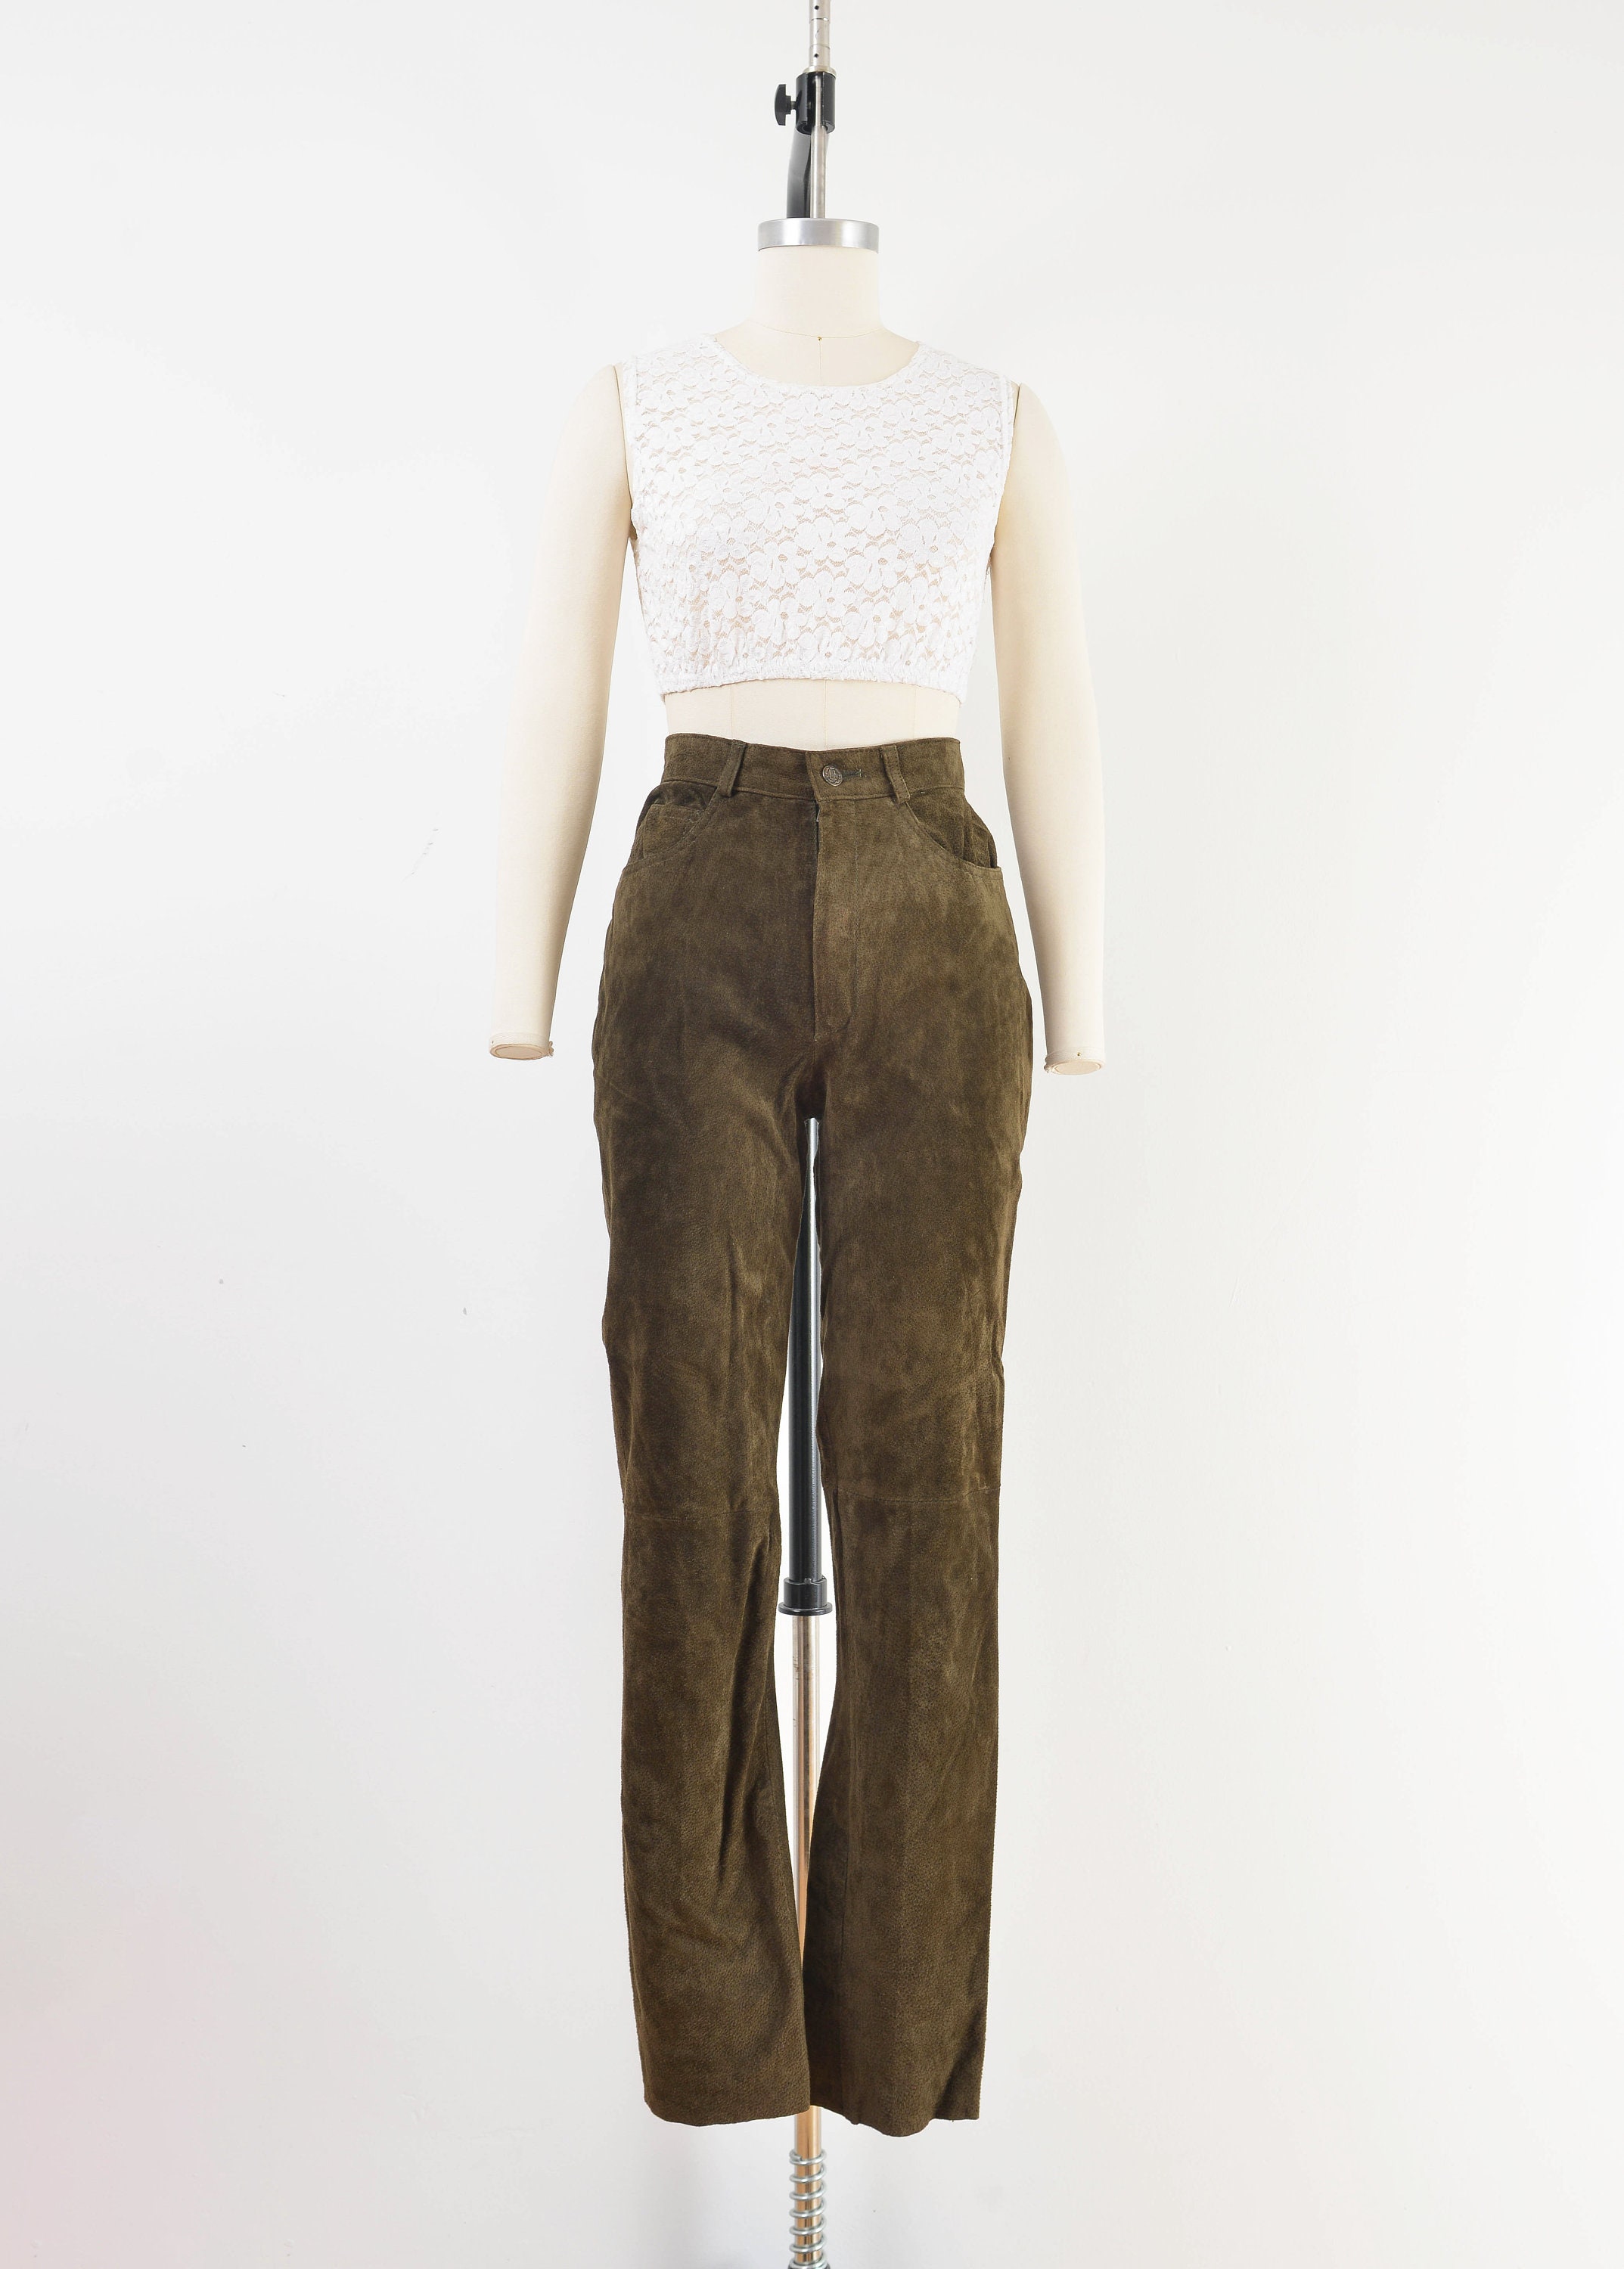 Vintage 80s Suede High Waisted Pants by Skott's Suede – Odd Faery